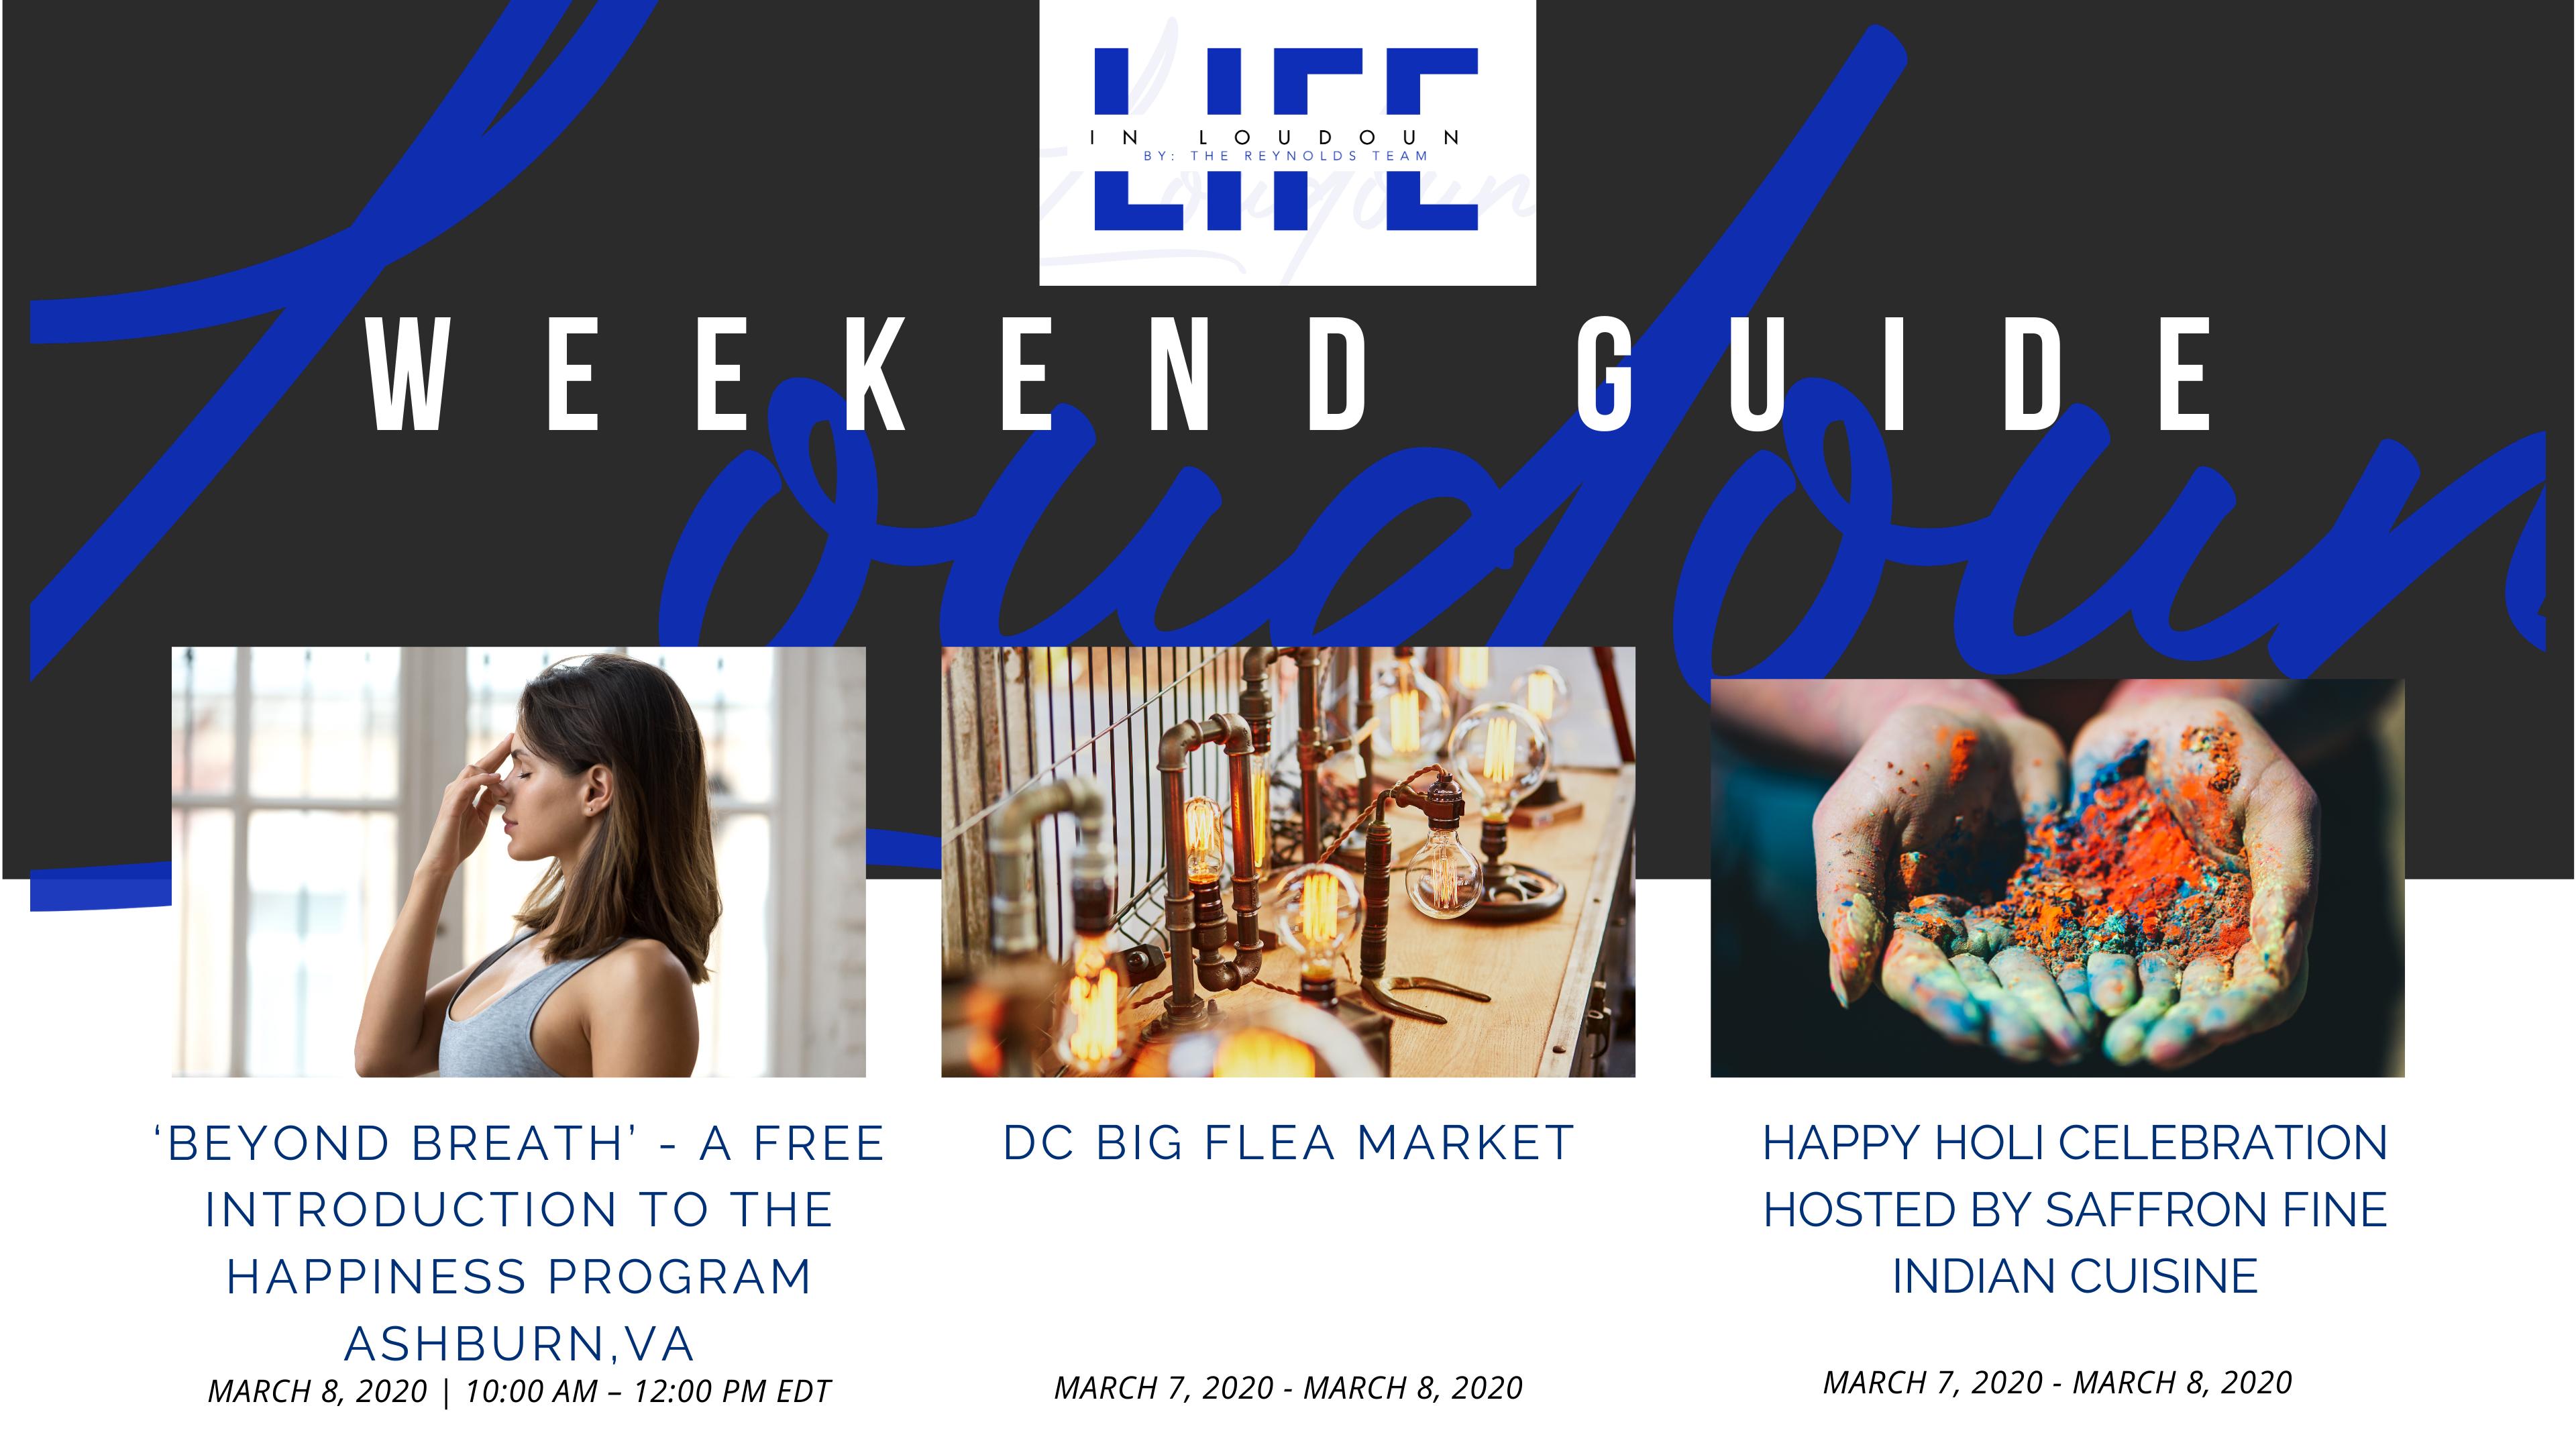 Weekend Events Guide for March 7 to 8